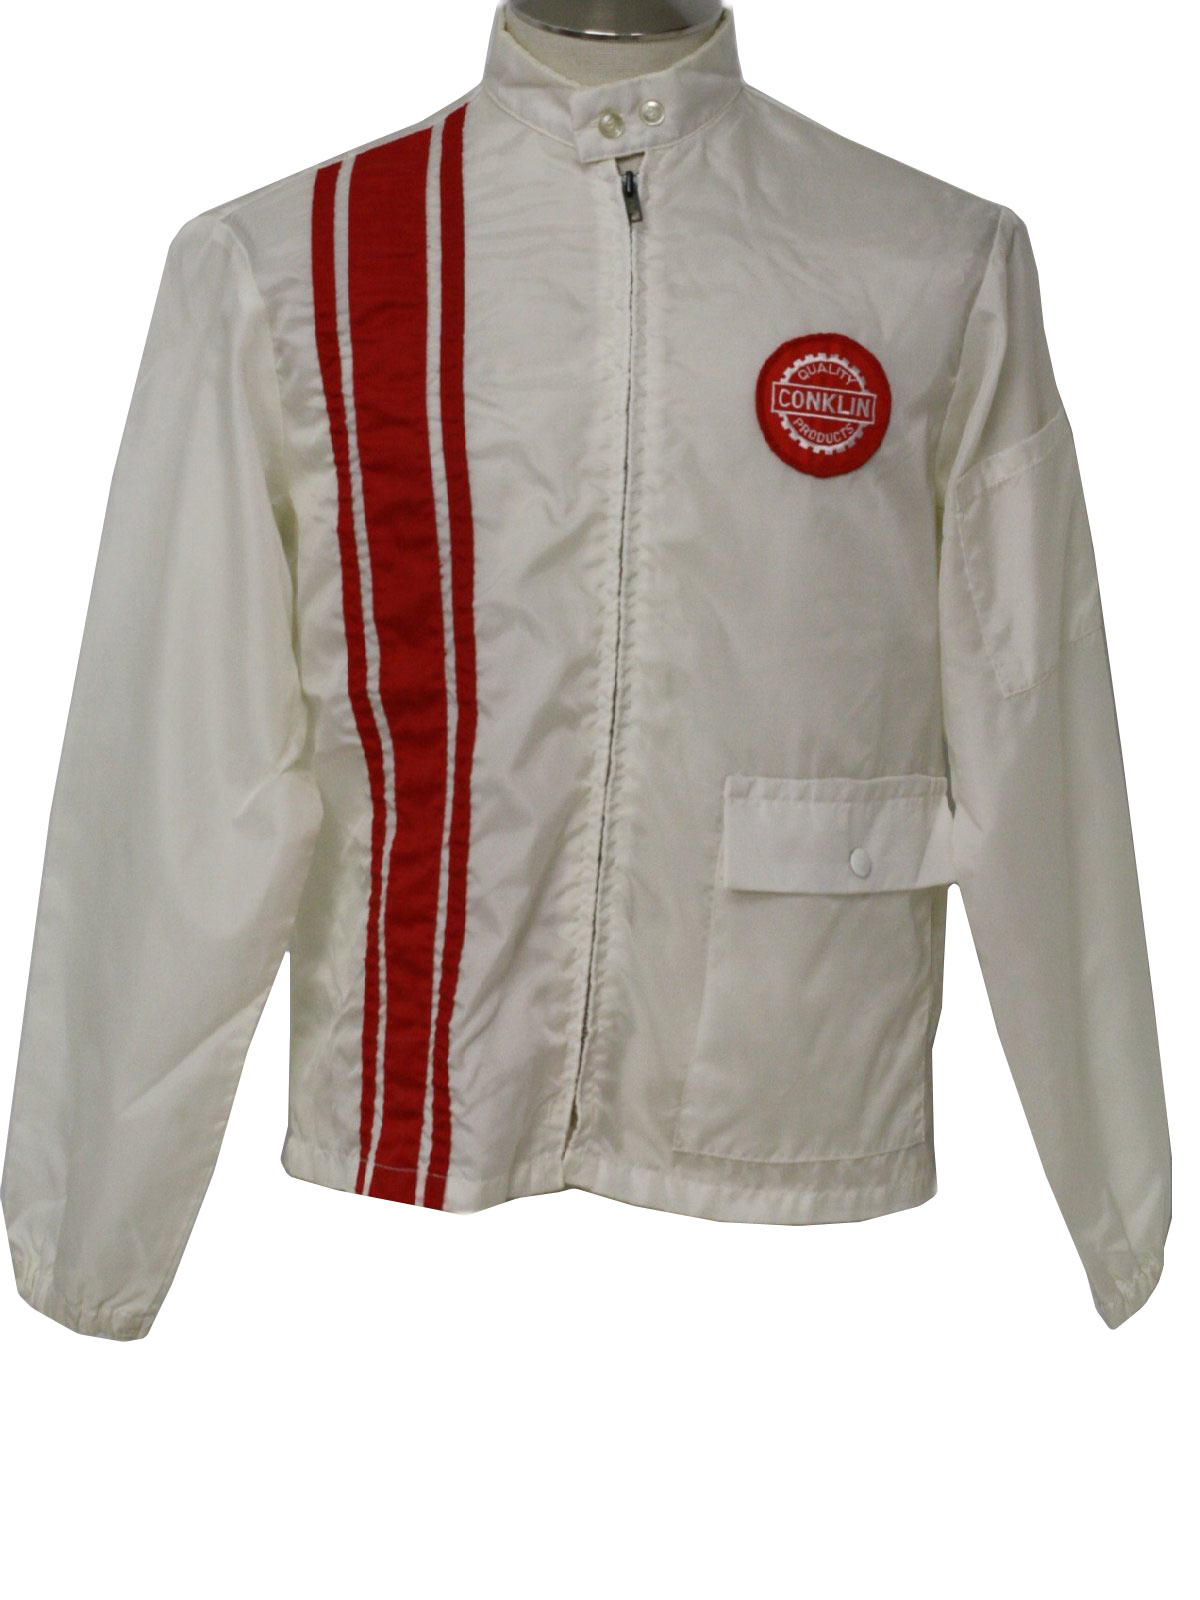 Seventies Swingster Jacket: 70s -Swingster- Mens white and red nylon ...